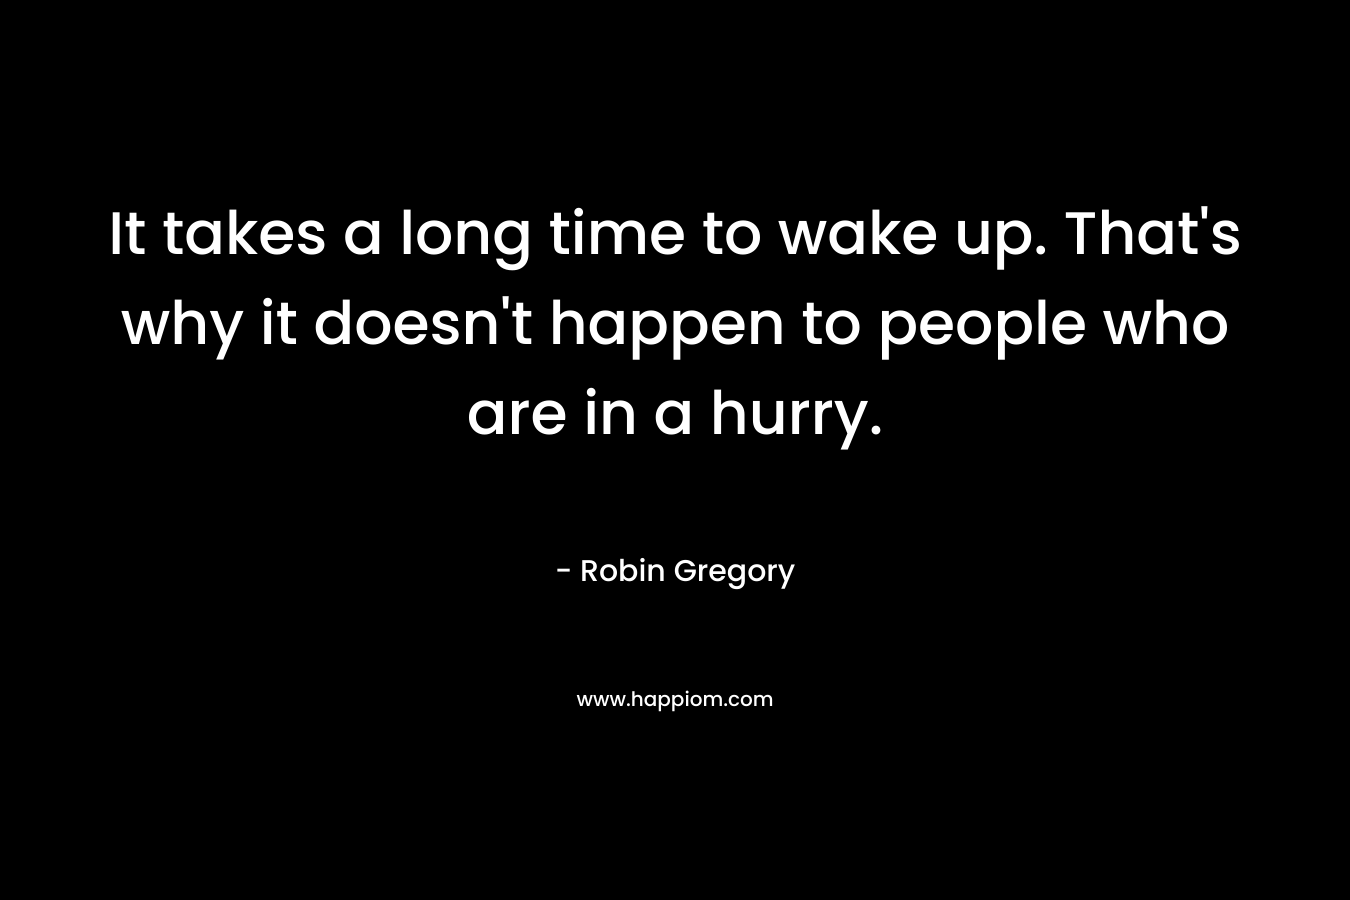 It takes a long time to wake up. That's why it doesn't happen to people who are in a hurry.